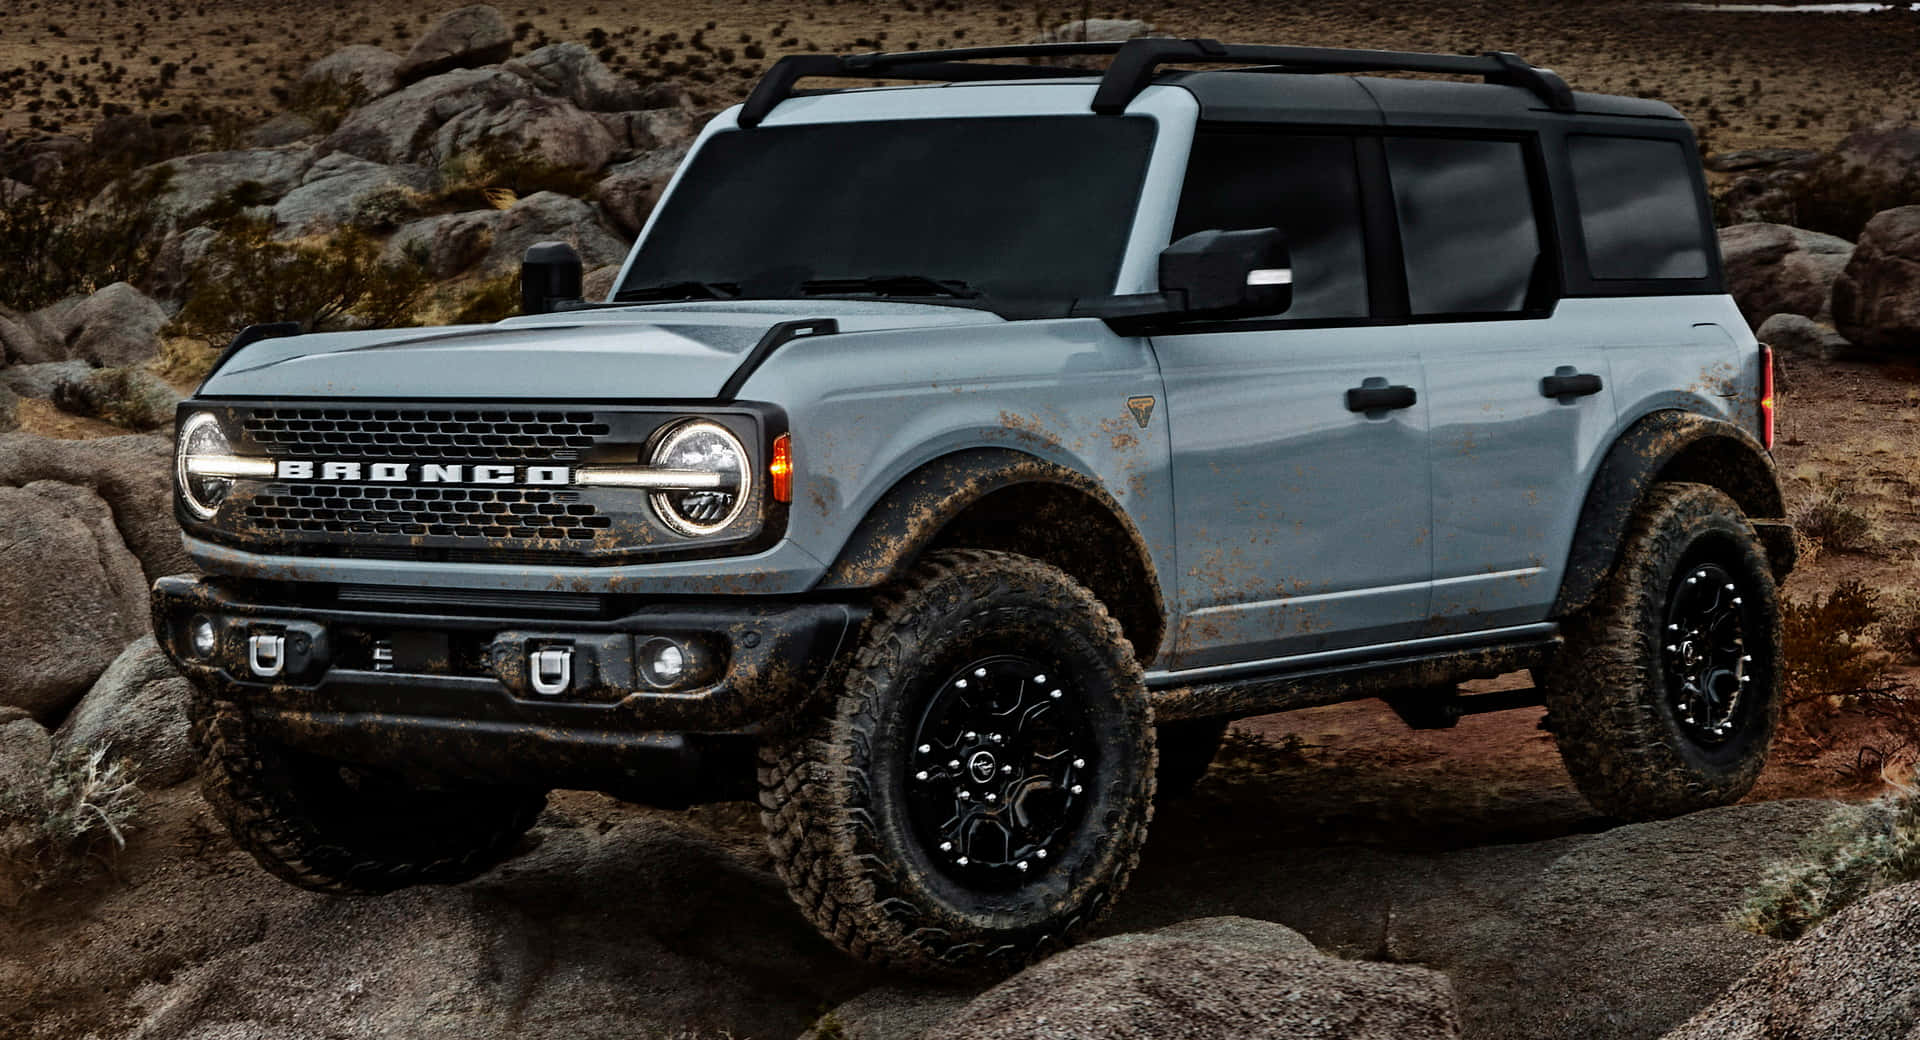 Off-roading in style with the Ford Bronco